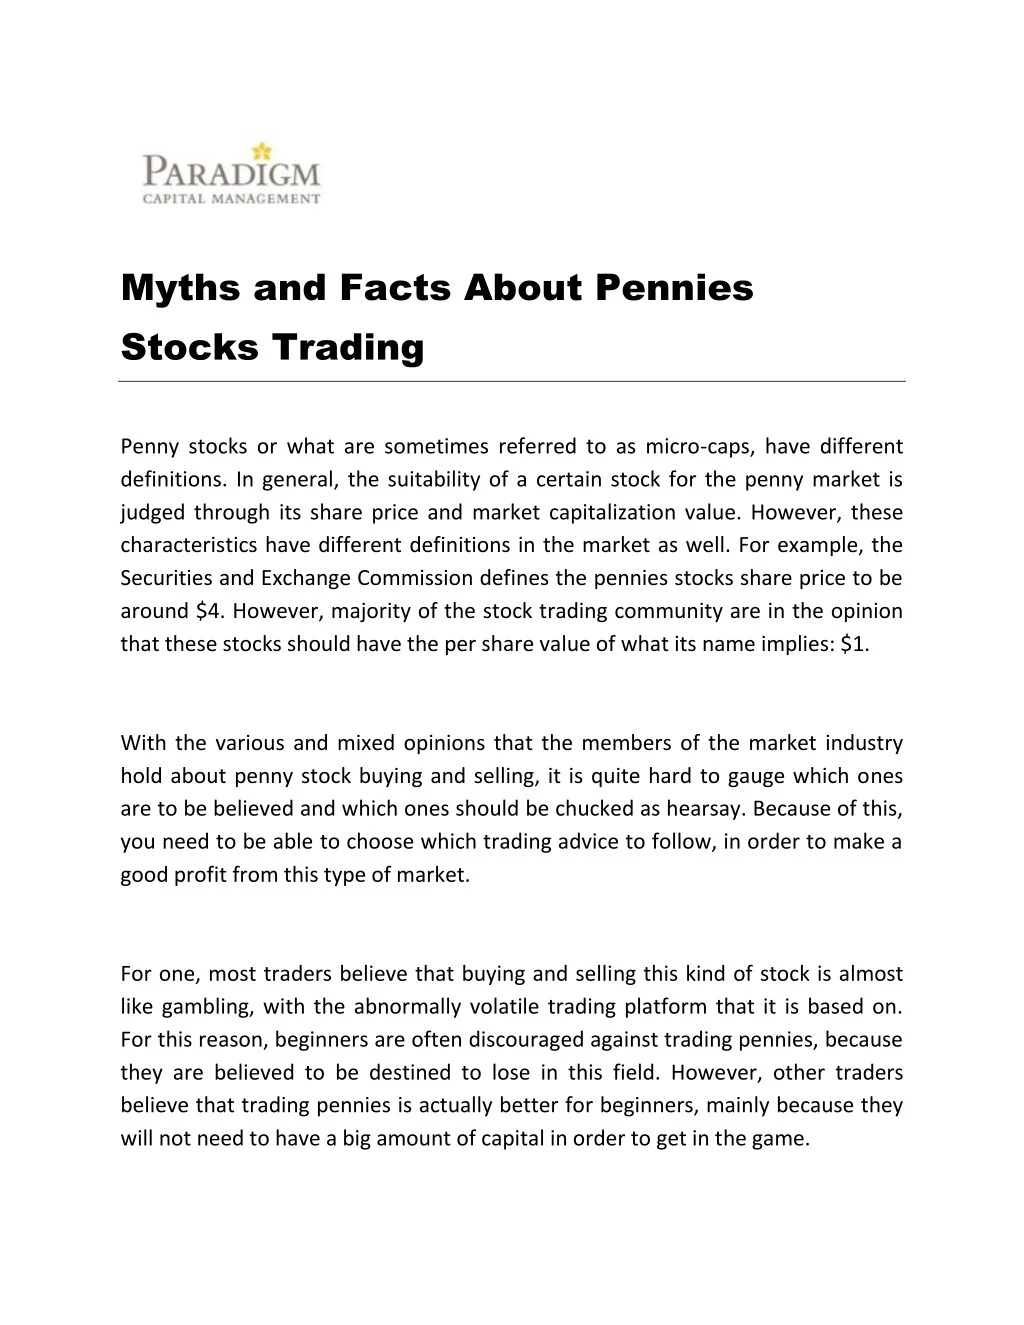 myths and facts about pennies stocks trading